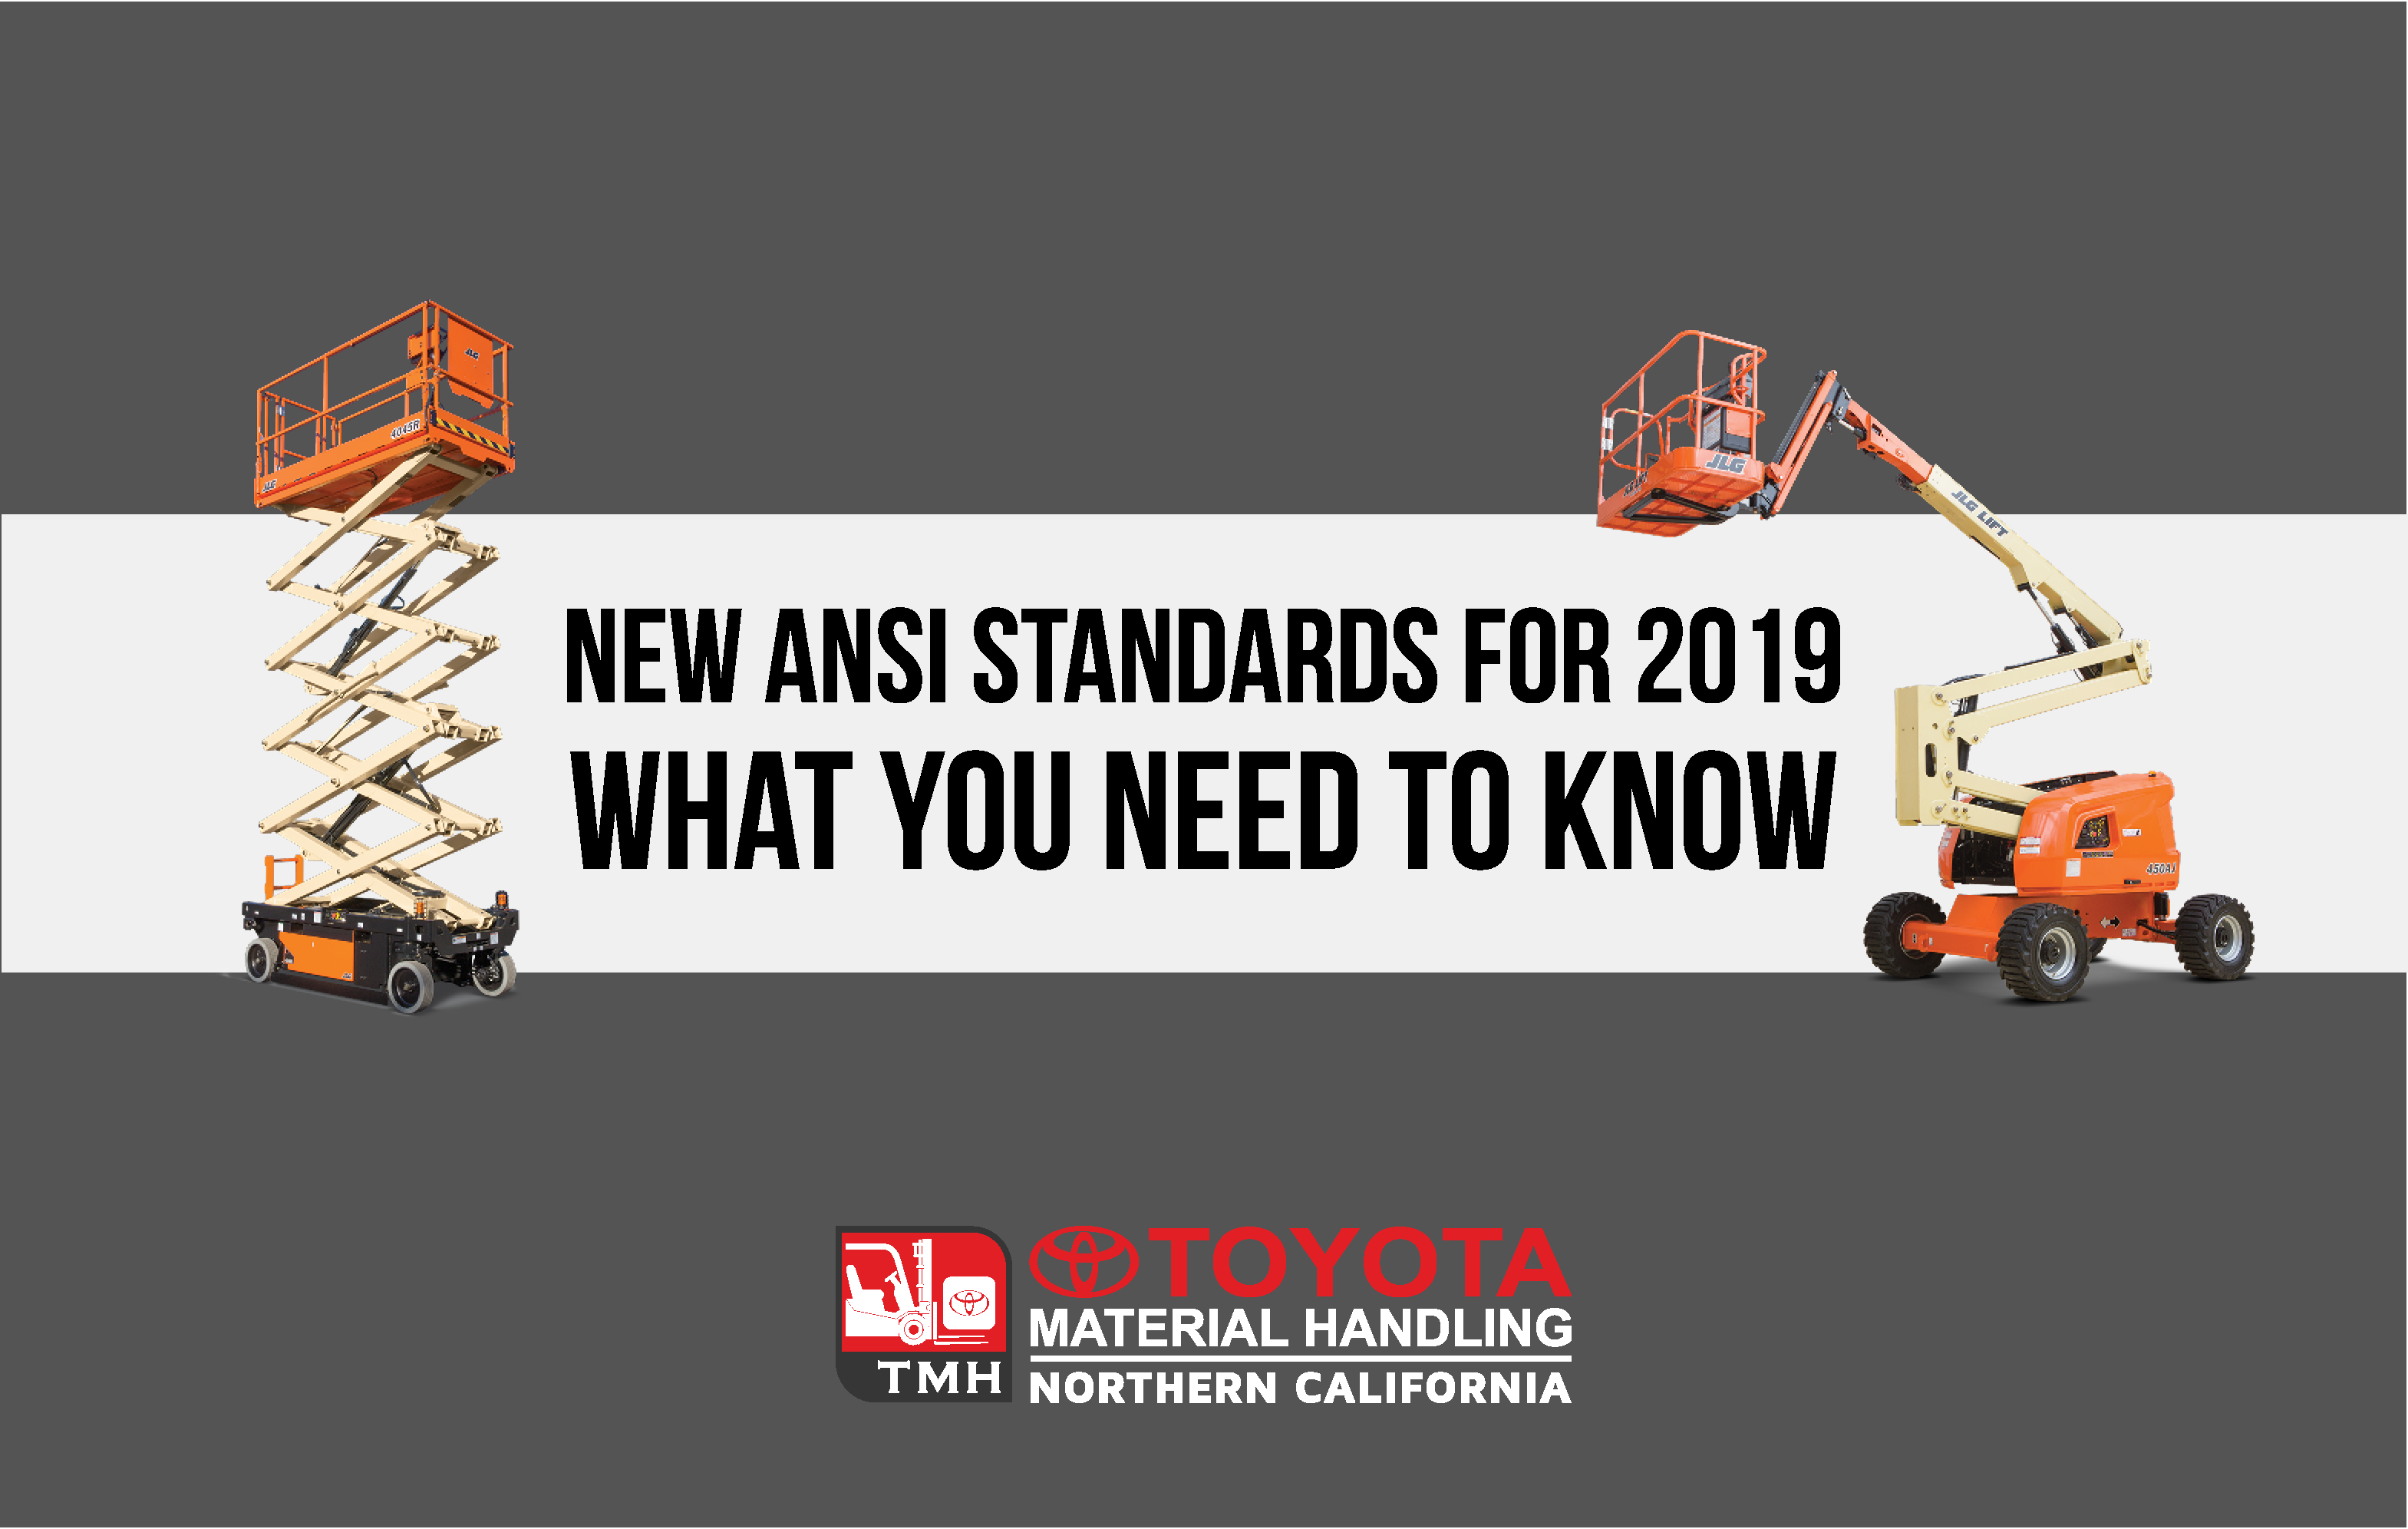 New Ansi Standards For 2019 - Time Is Running Out